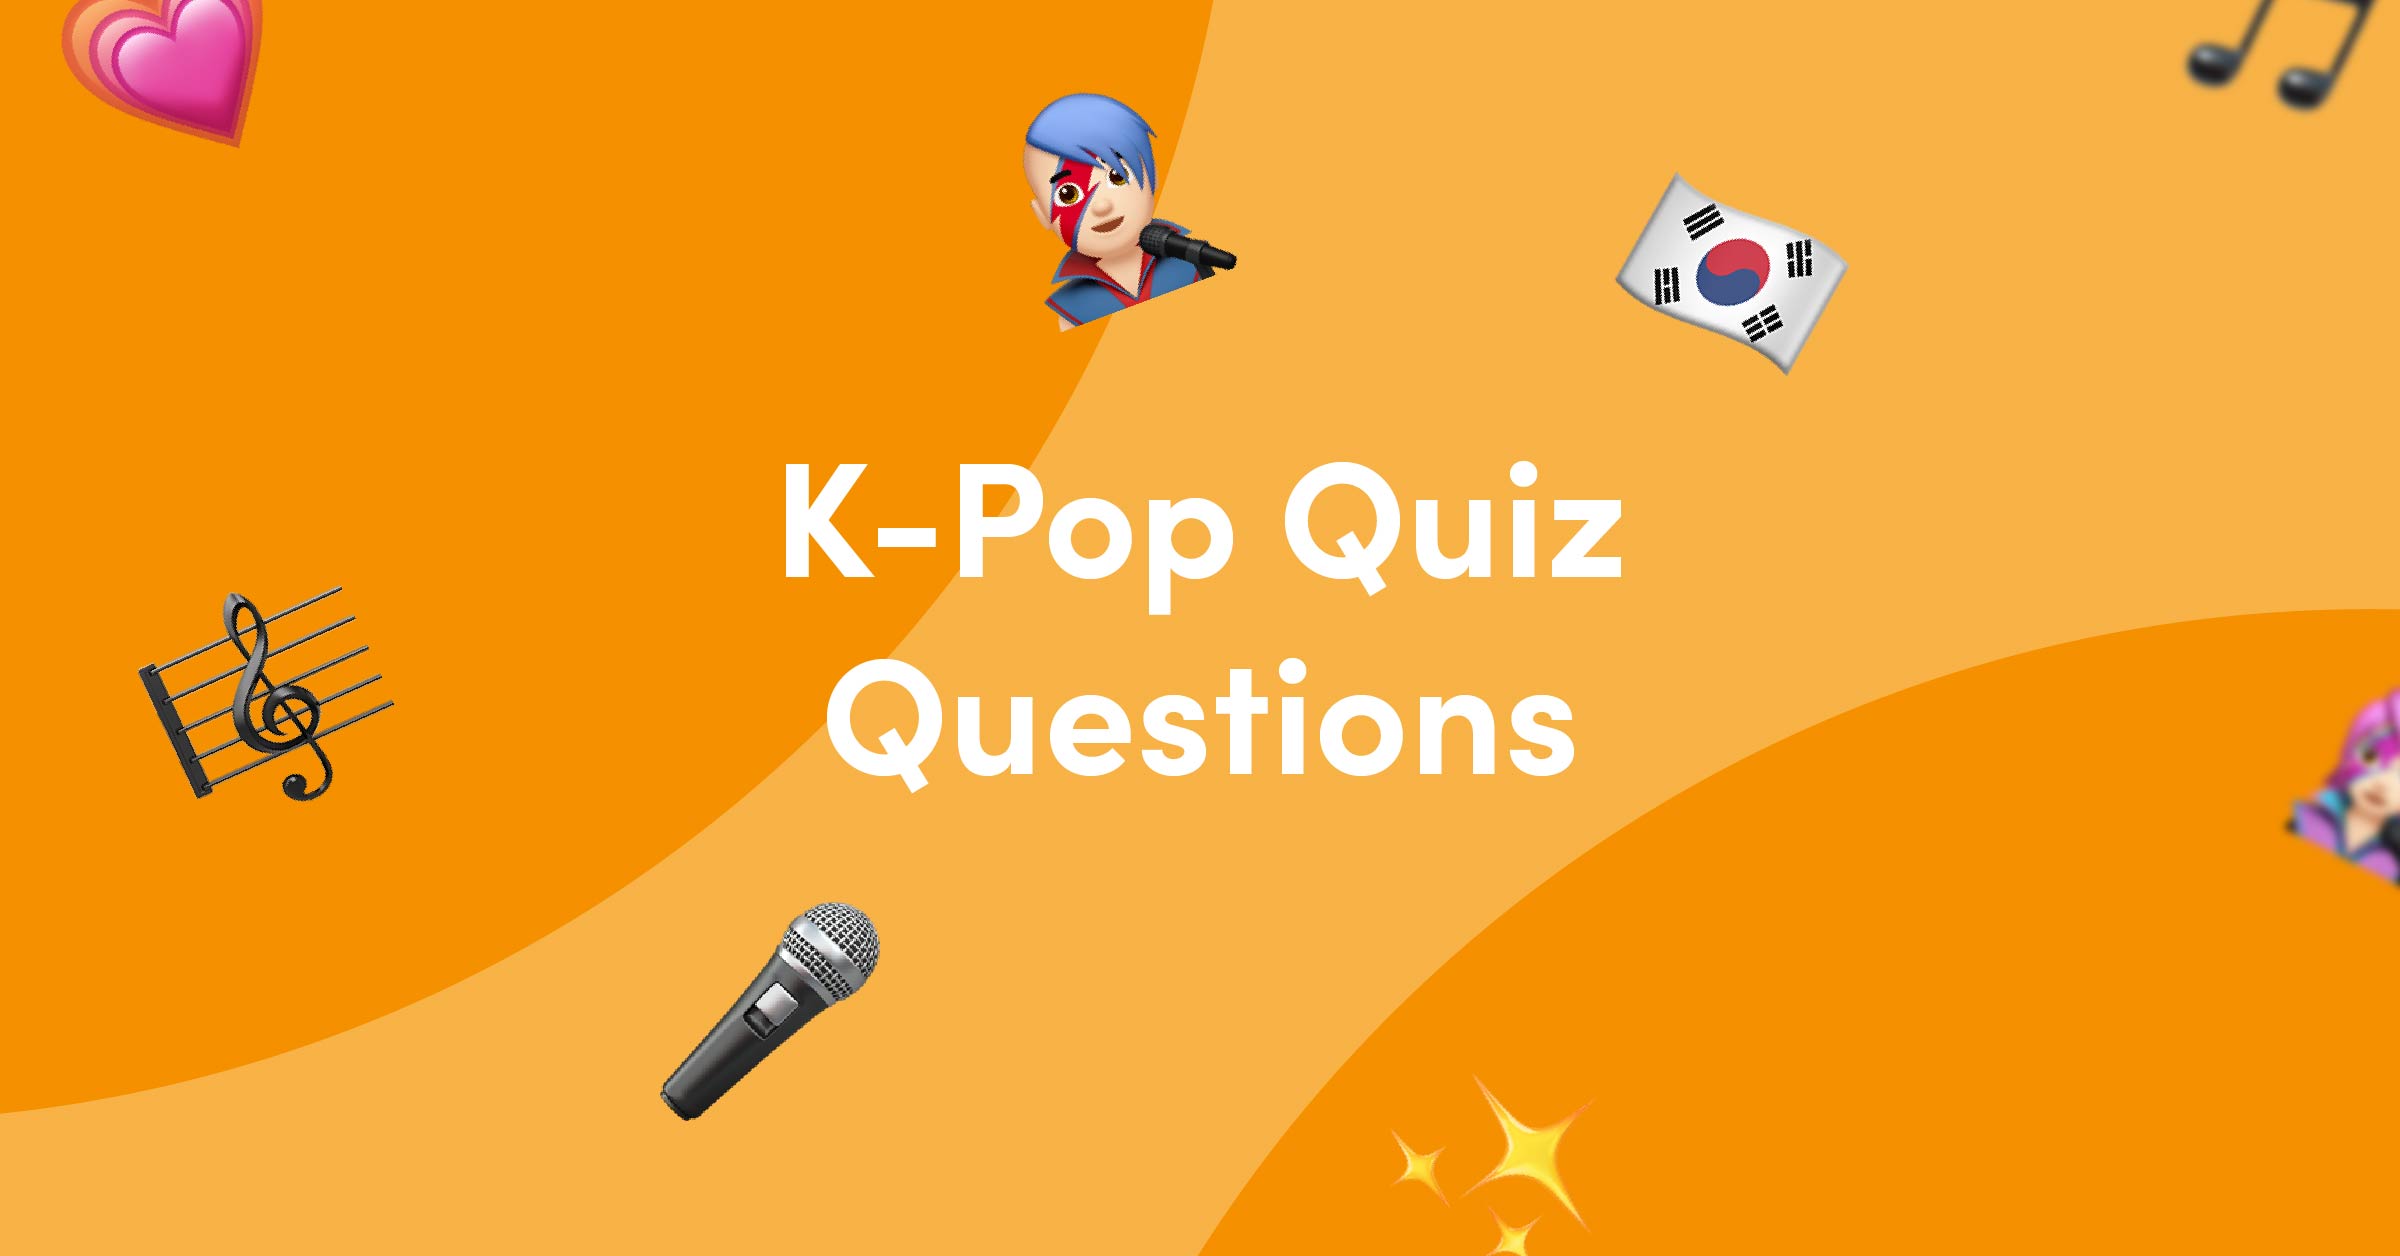 Emojis on orange background for K-Pop quiz questions and answers